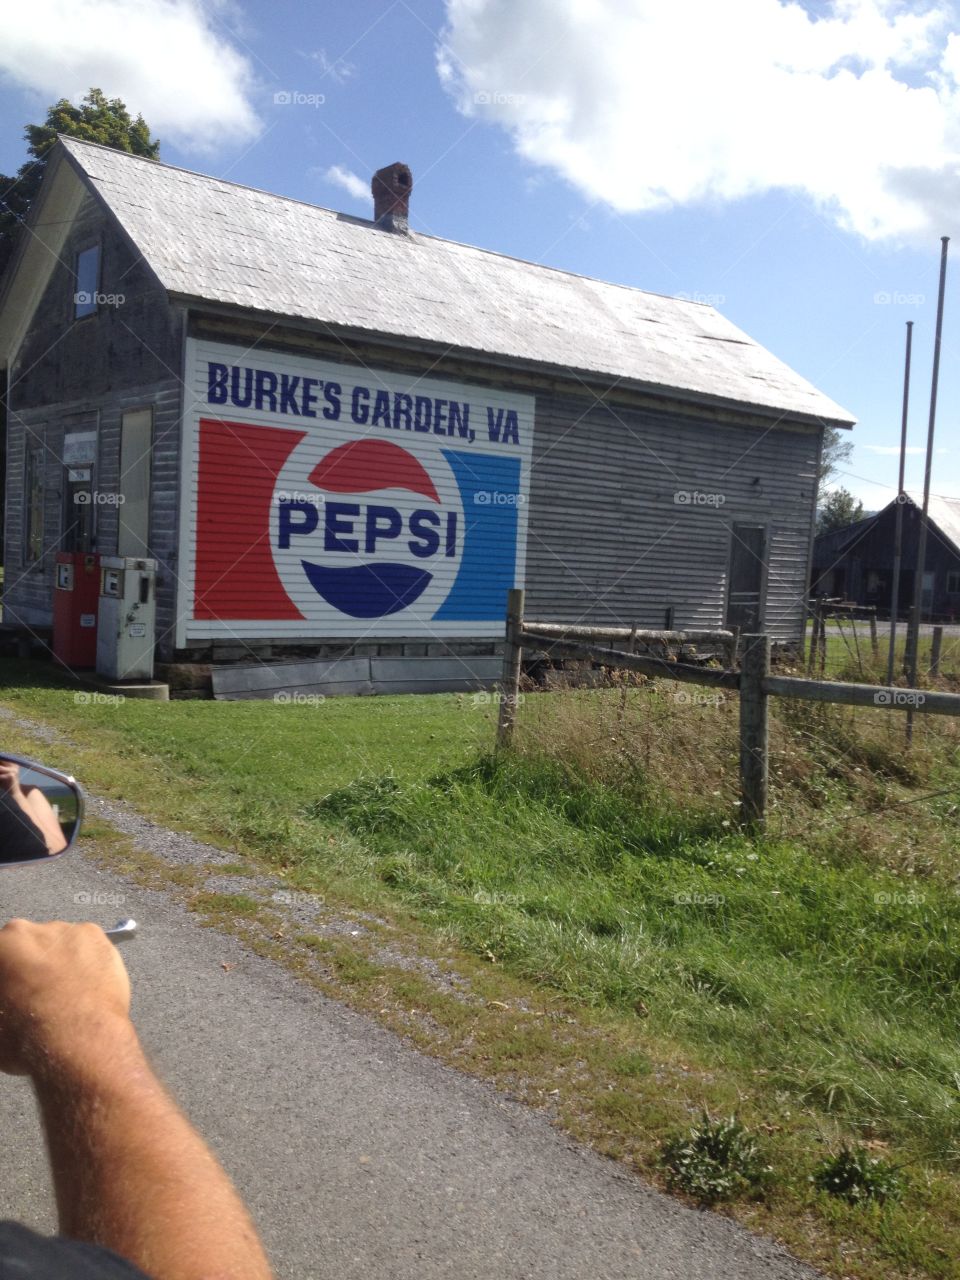 Old Country Store. A display of the Pepsi symbol on an old store in Burkes Garden VA. Keeping the old fashioned still alive today